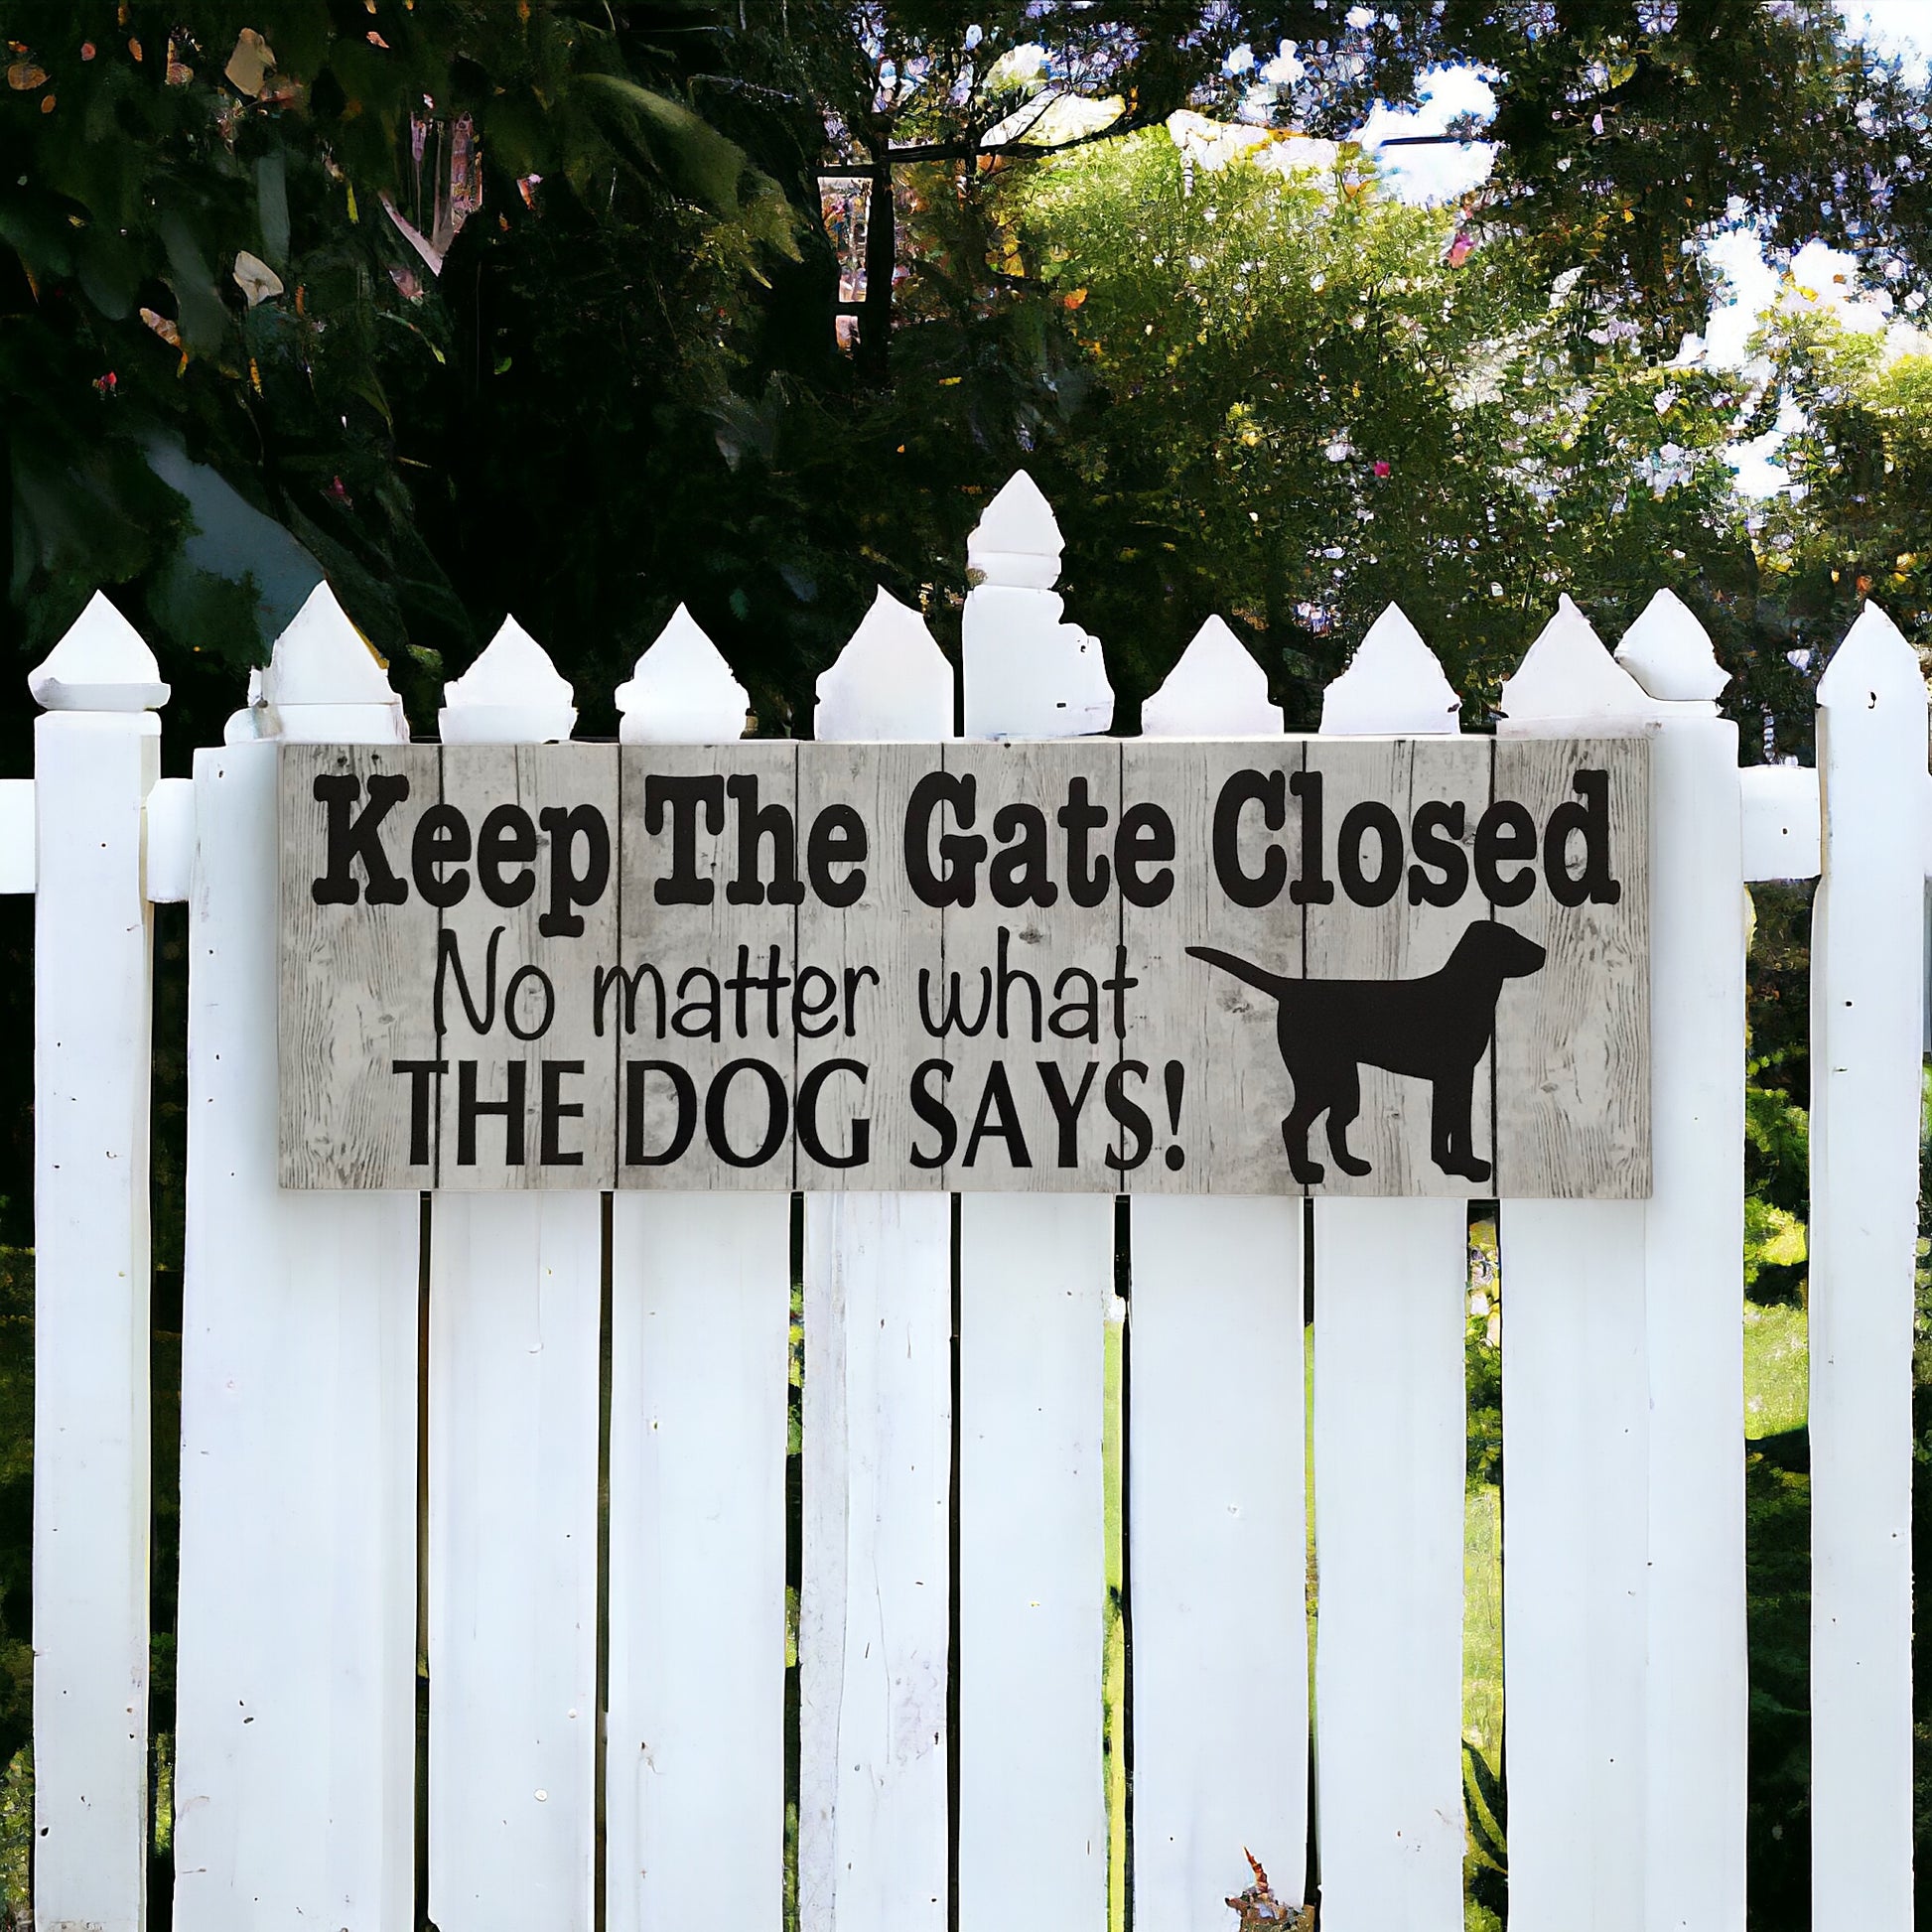 Keep The Gate Closed Dog or Dogs Sign - The Renmy Store Homewares & Gifts 